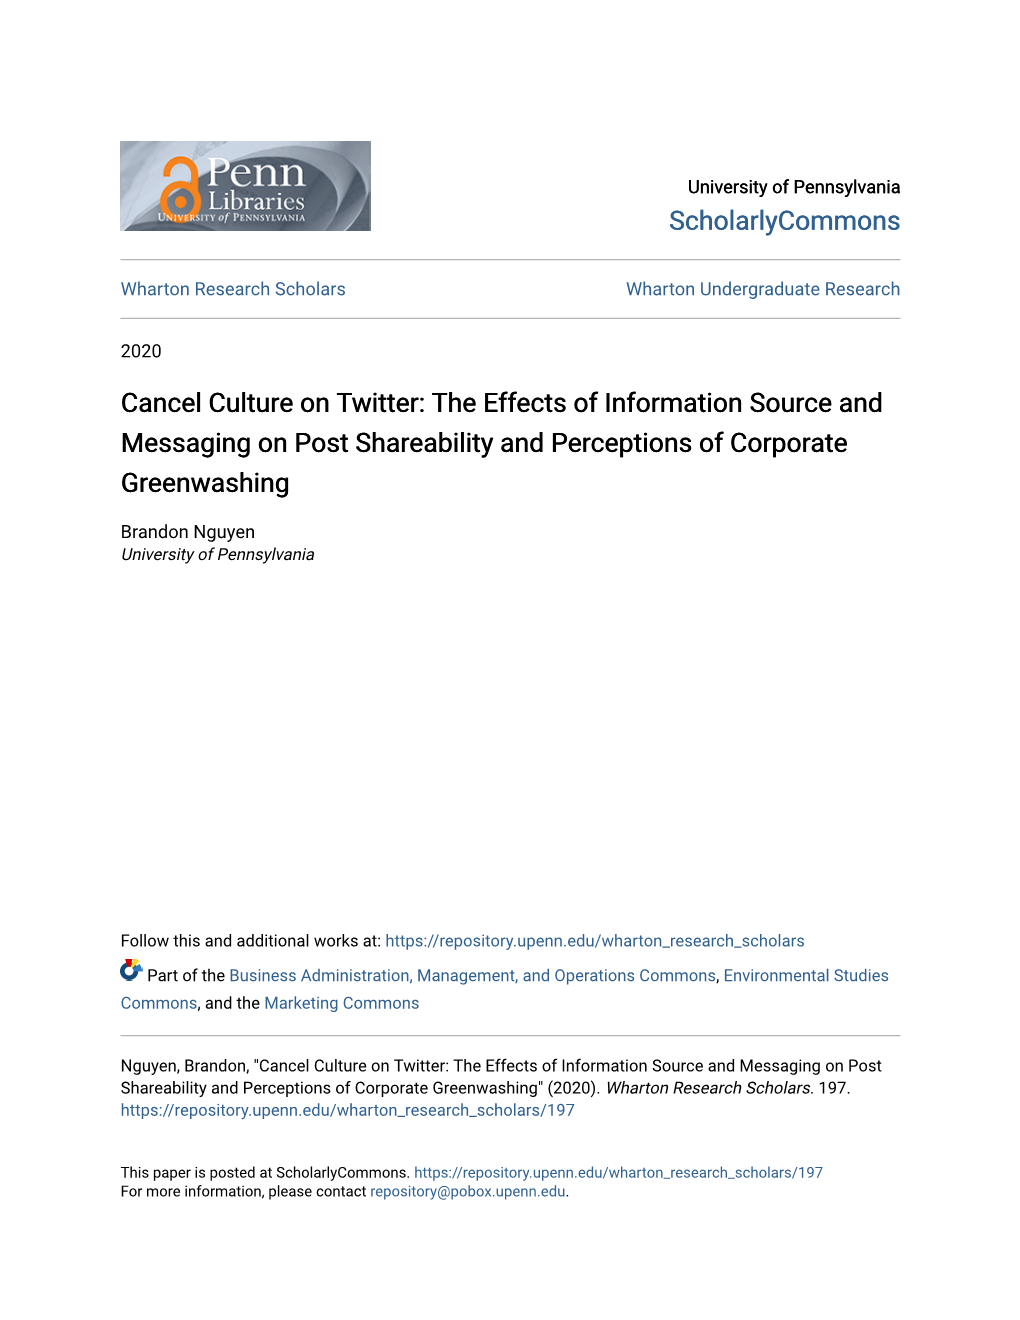 Cancel Culture on Twitter: the Effects of Information Source and Messaging on Post Shareability and Perceptions of Corporate Greenwashing